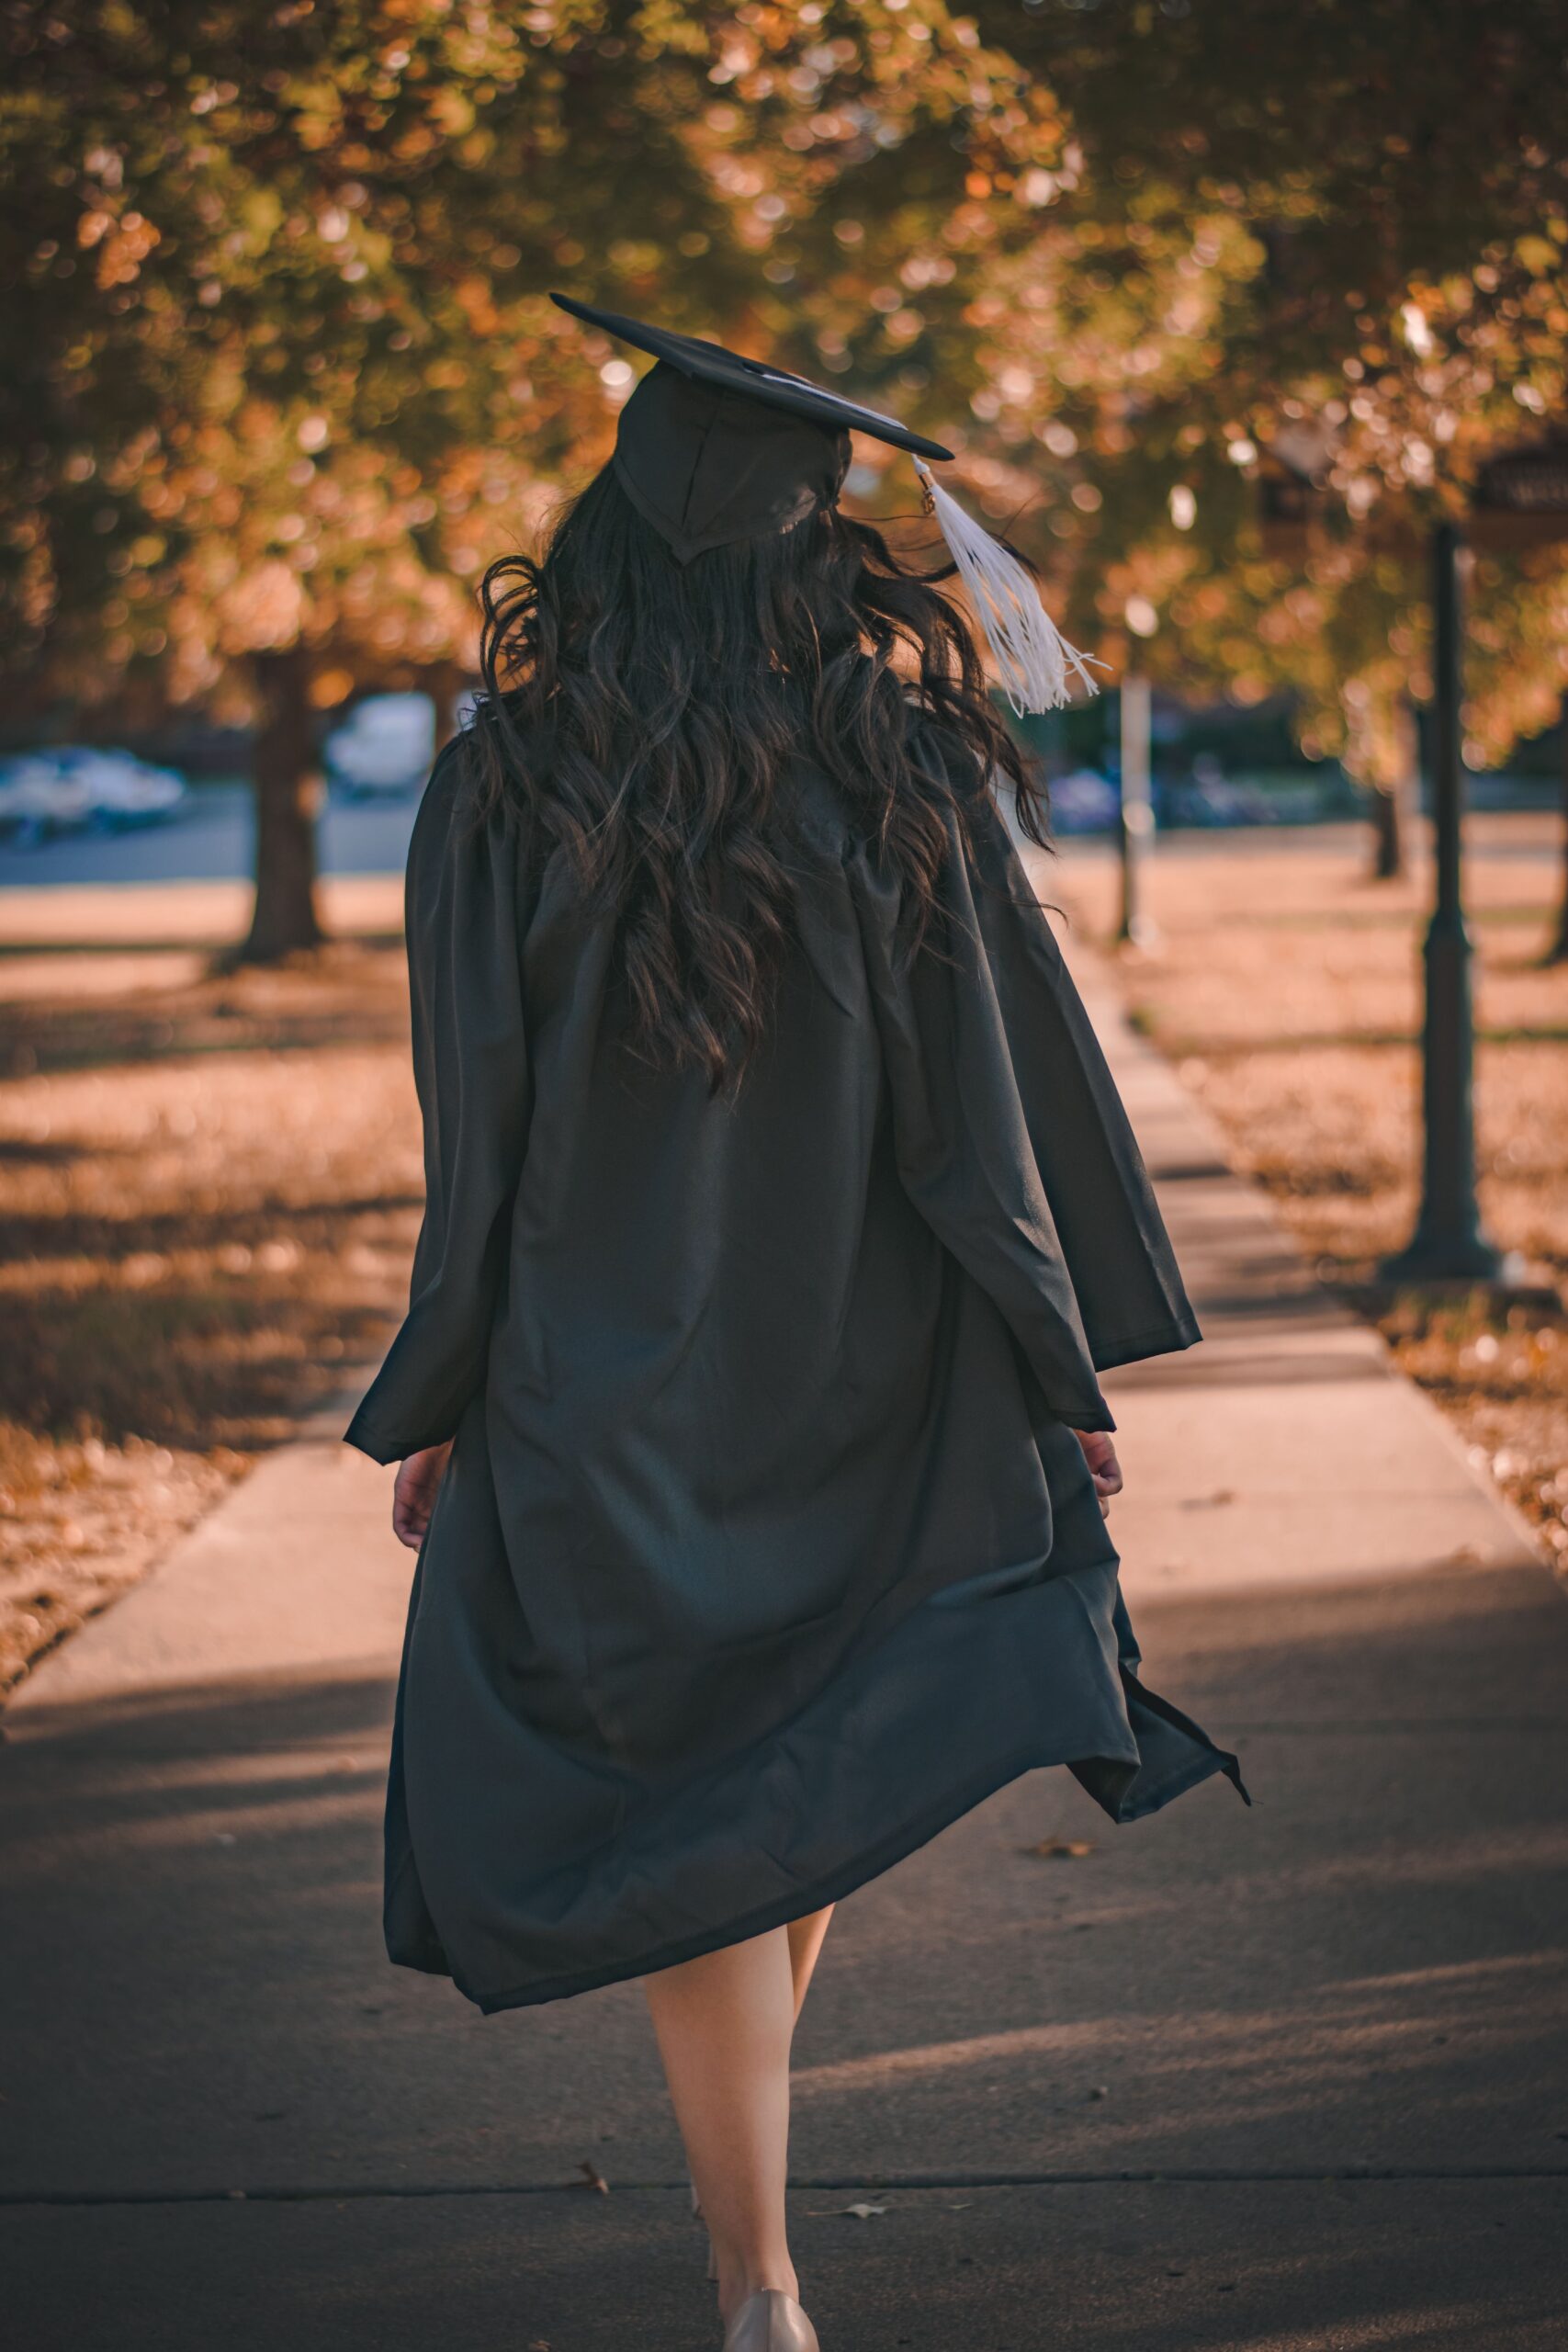 Girl walking away from the camera while wearing a graduation cap and gown.